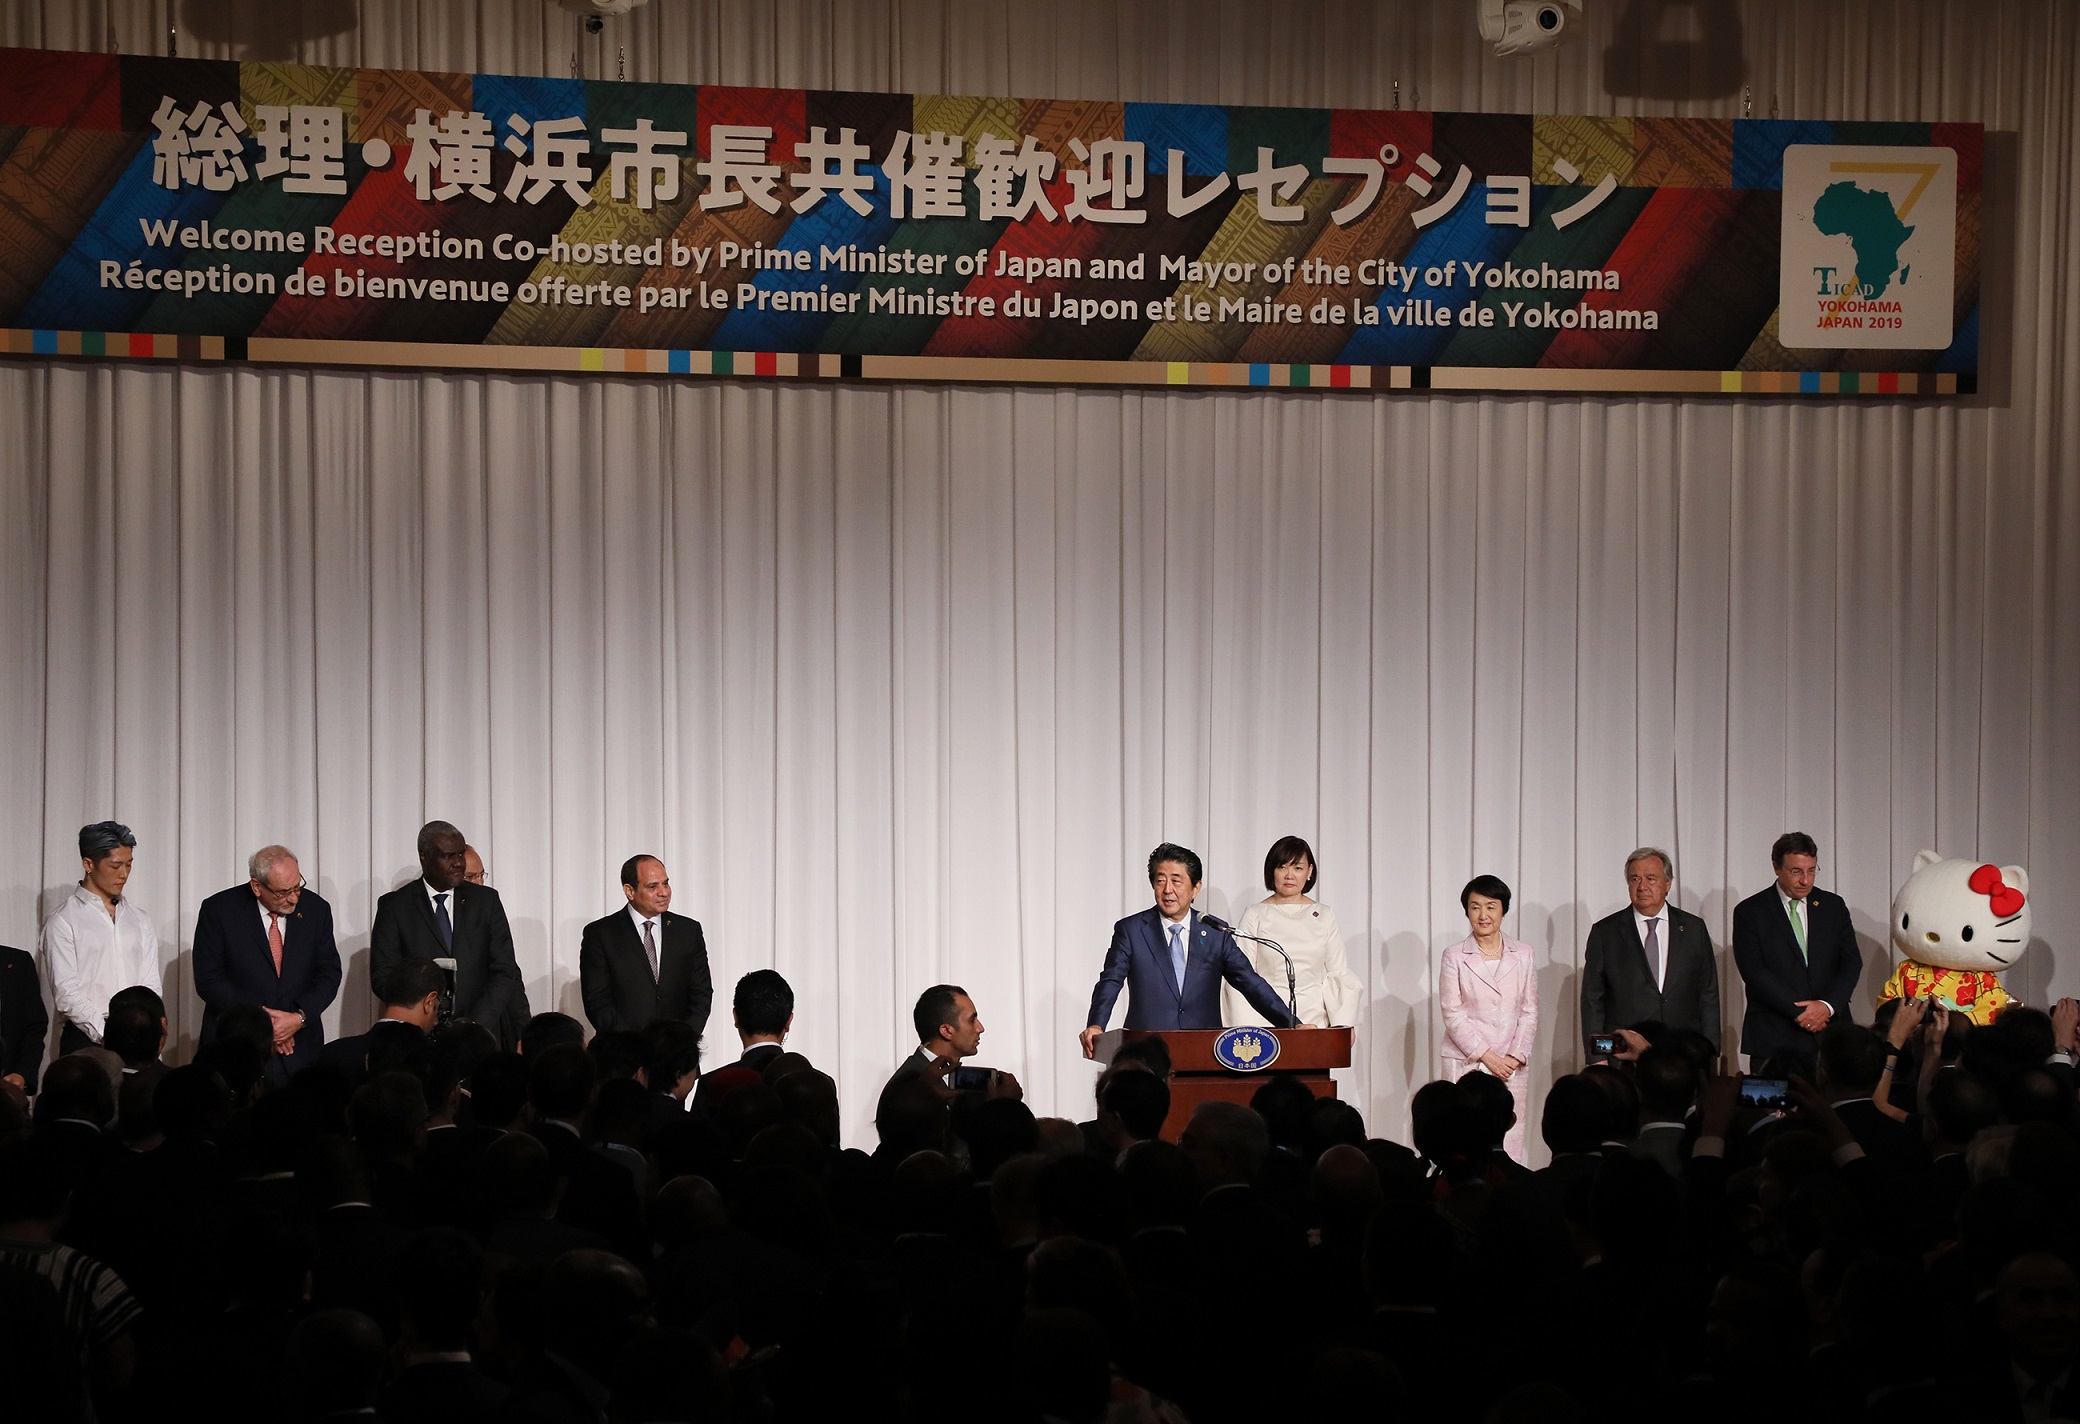 Photograph of the welcome reception co-hosted by the Prime Minister and the Mayor of Yokohama